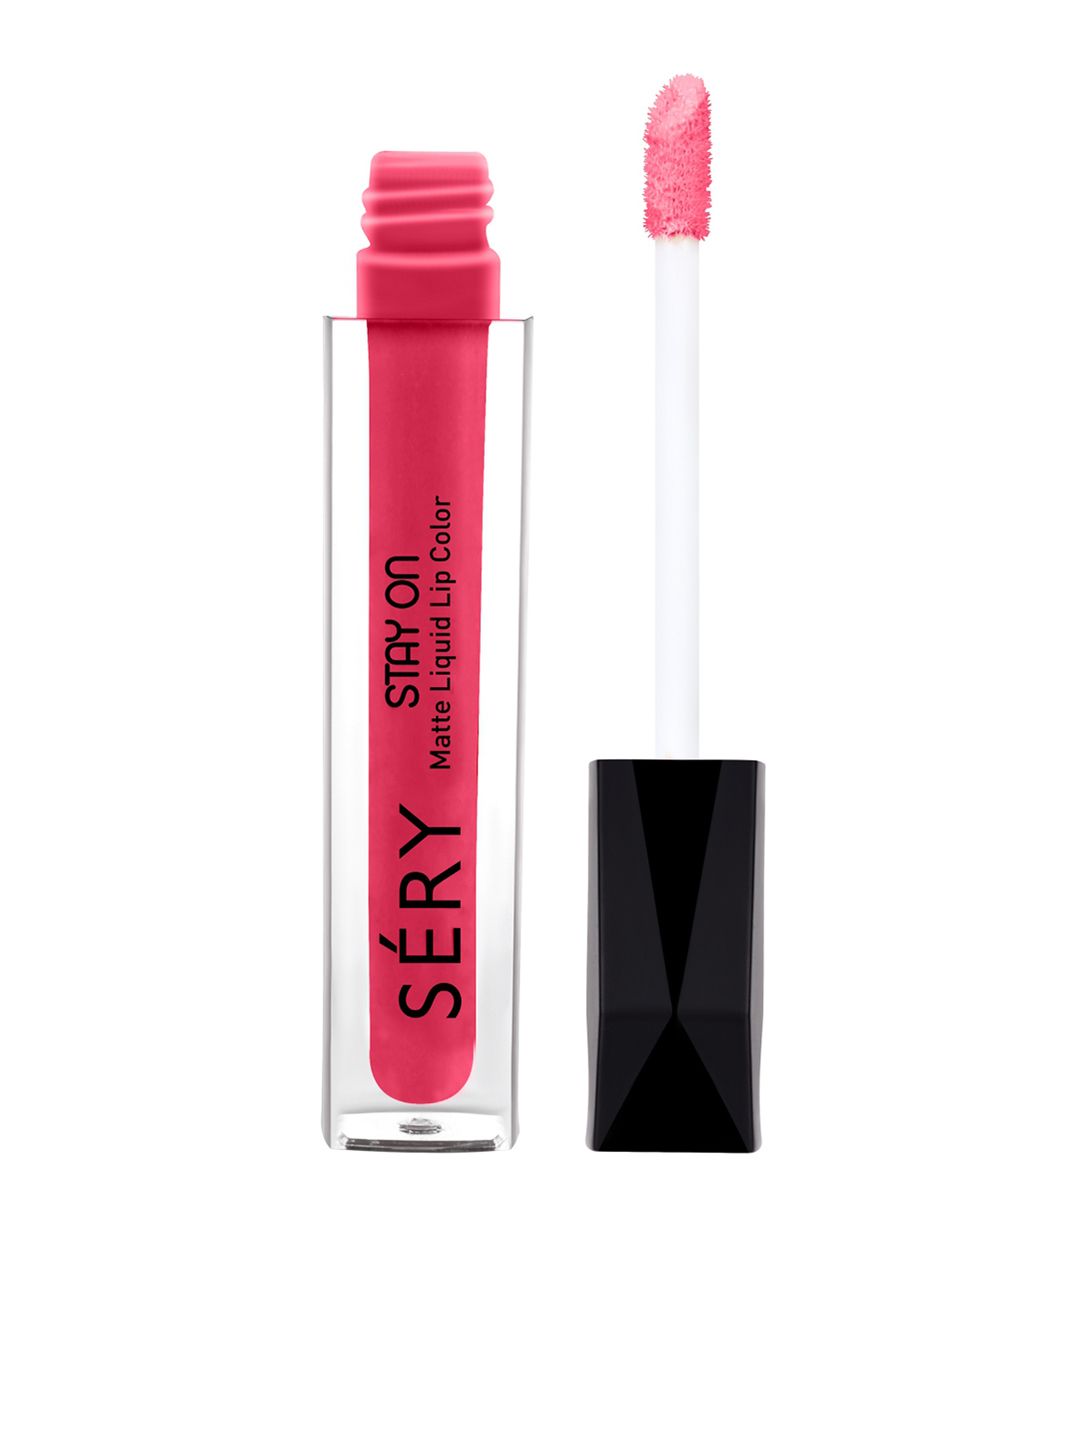 SERY Stay On Liquid Matte Lip Color-Peach Tart LSO-03 Price in India